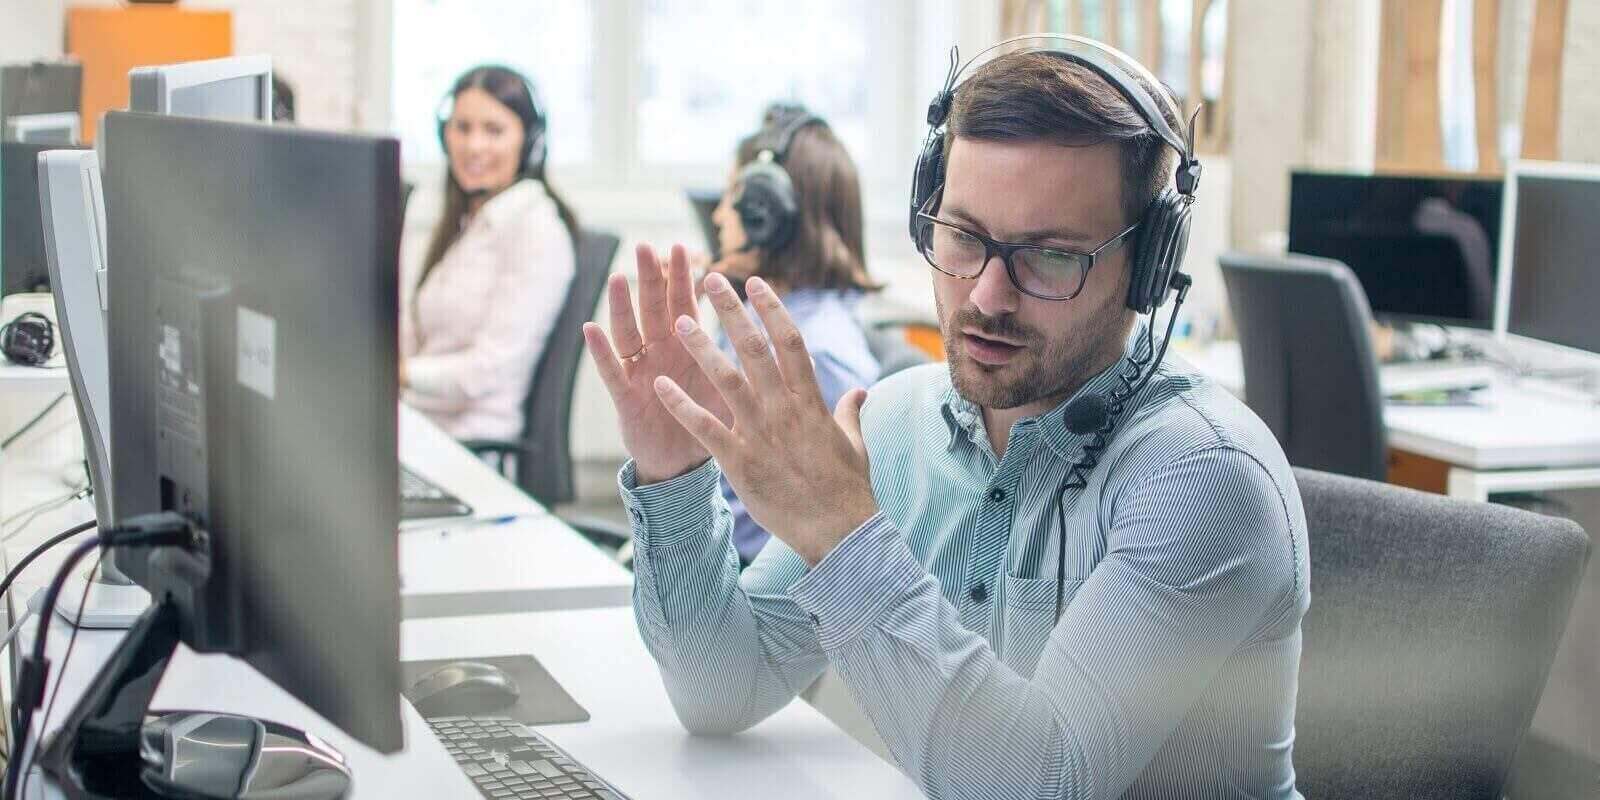 male technical support agent trying to explain something to a client while using hands